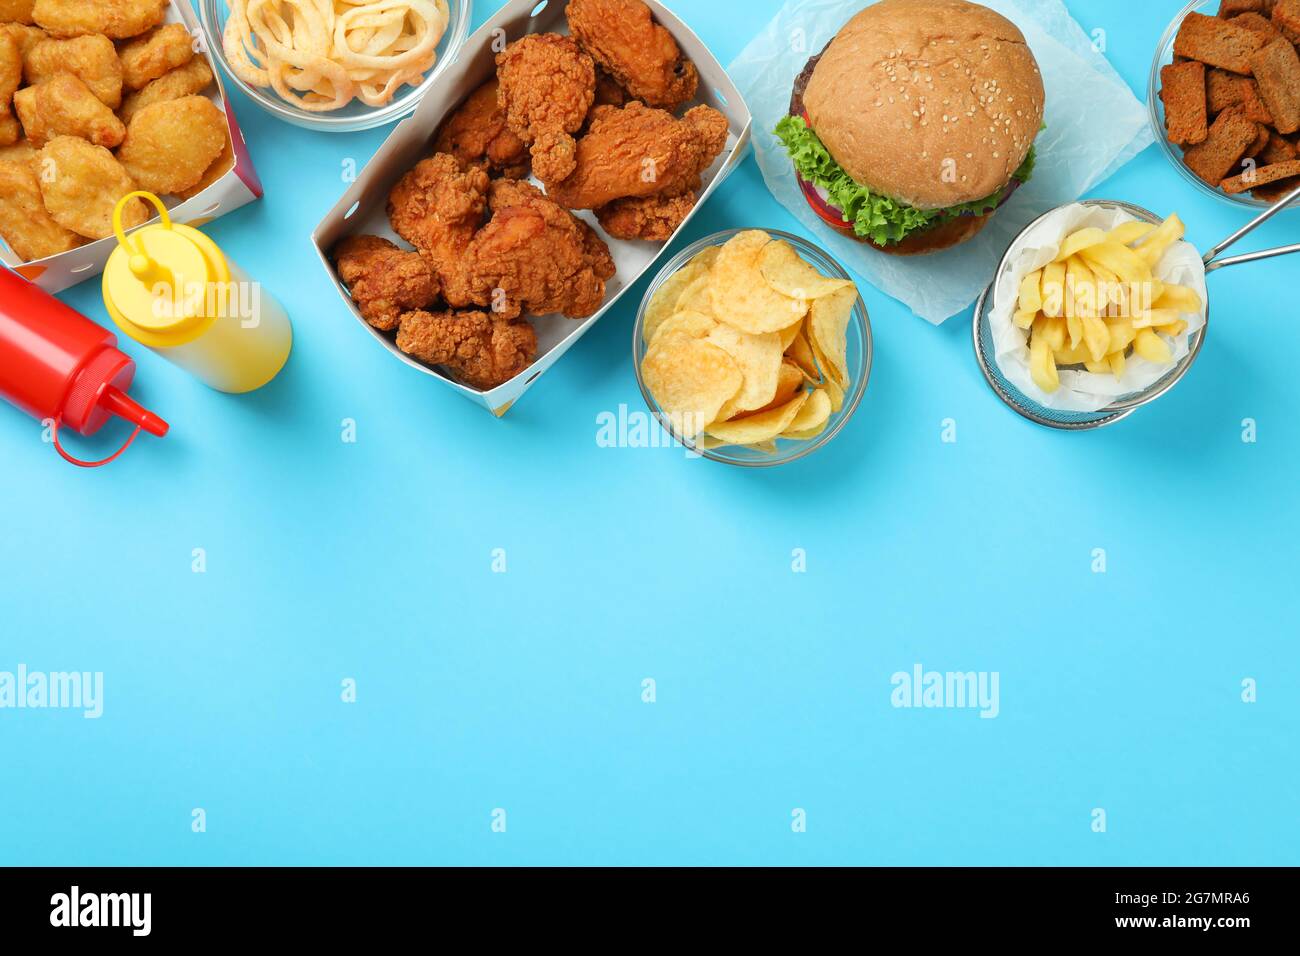 Fast Food Big Lunch Packaging Set On Dark Blue Abstract Background Copy  Space Stock Photo - Download Image Now - iStock